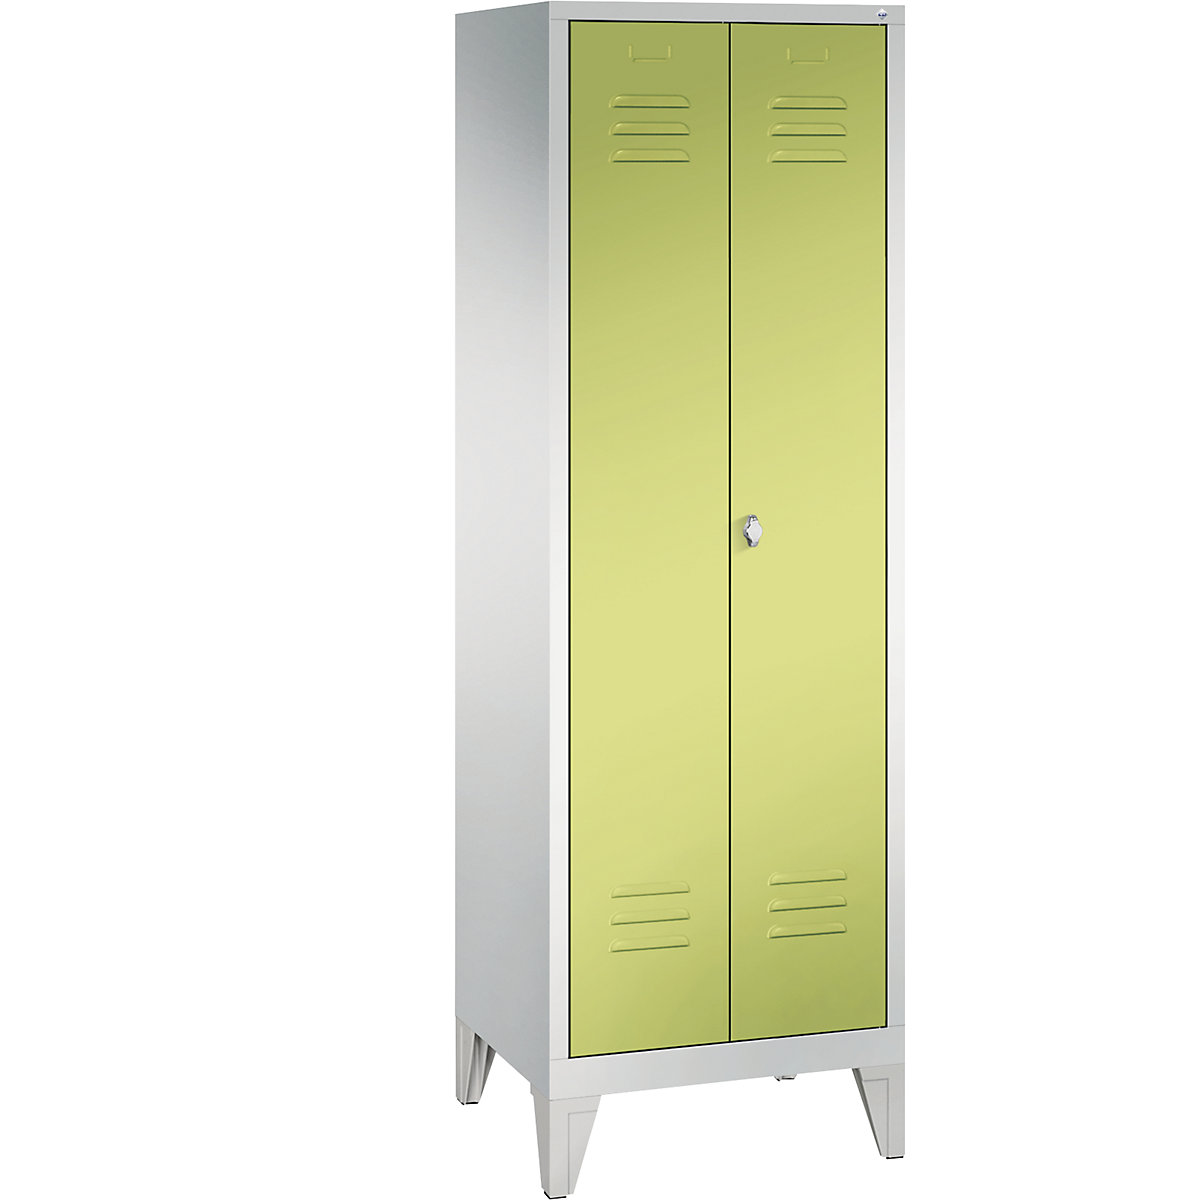 CLASSIC equipment cupboard with feet – C+P, 2 compartments, compartment width 300 mm, light grey / viridian green-13